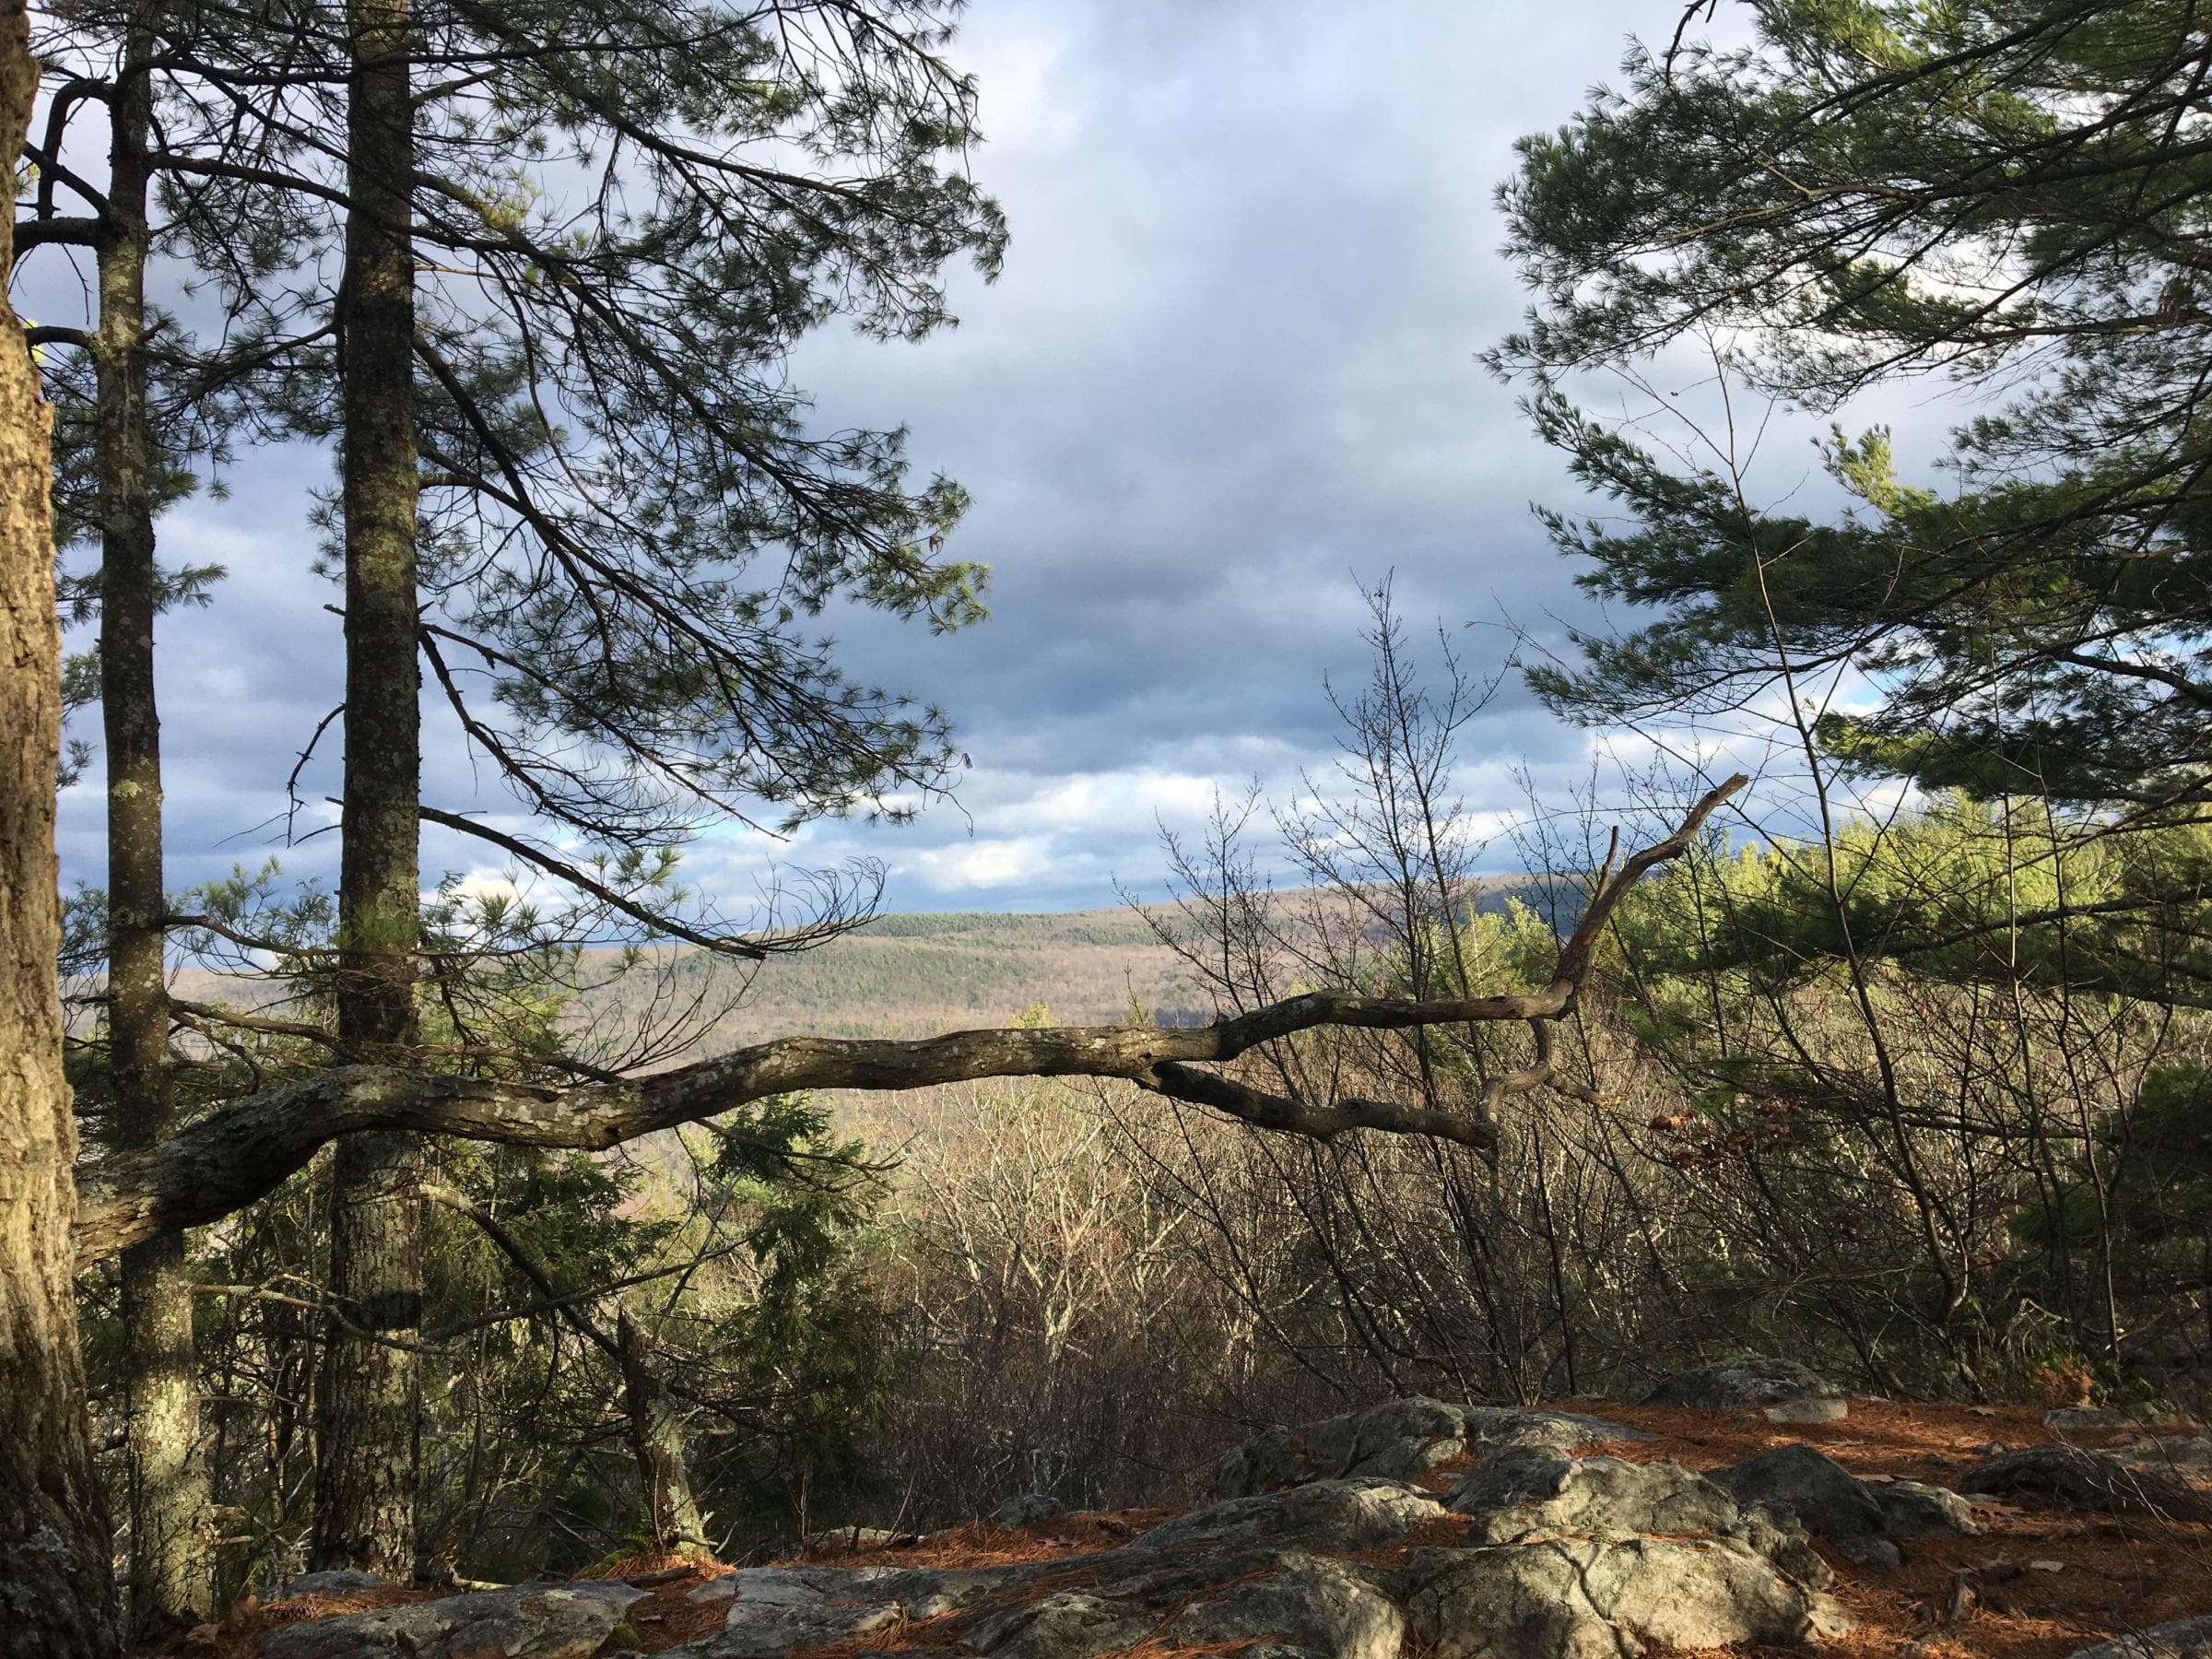 A view near Squaw Peak on Monument Mountain. Working with the Stockbridge-Munsee Band of Mohican Indians, The Trustees is changing the name of the peak to Peeskawso, which means virtuous woman. (Nancy Eve Cohen/NEPM)